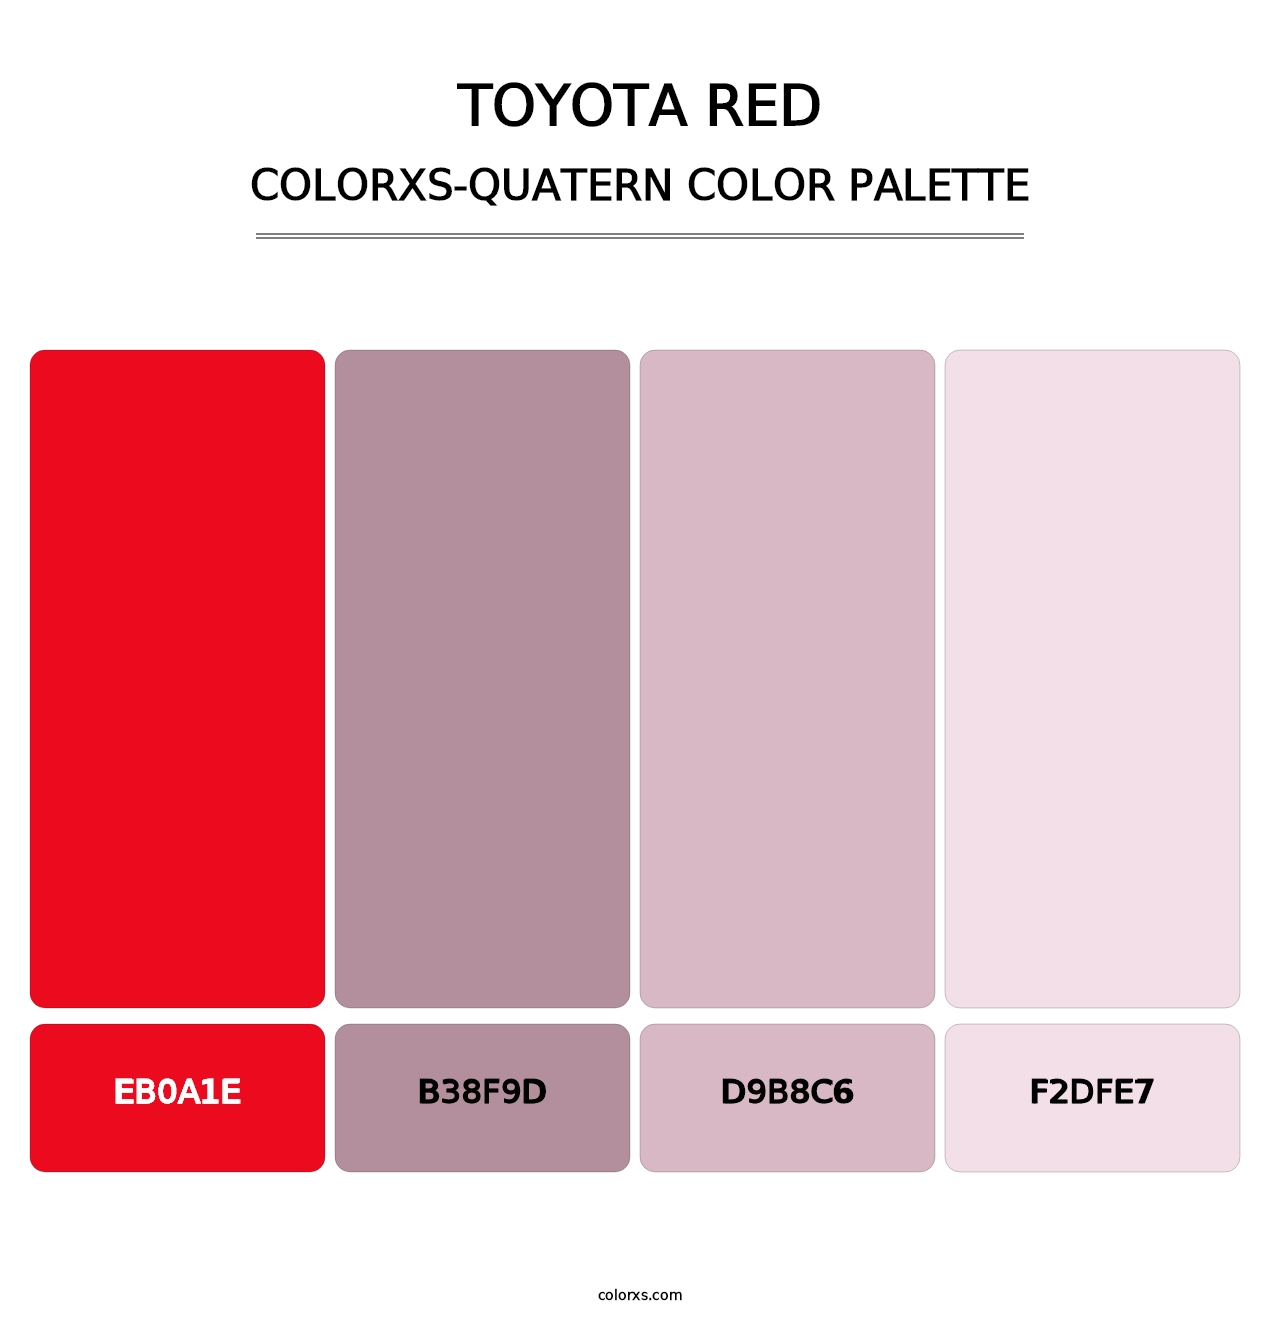 Toyota Red - Colorxs Quatern Palette